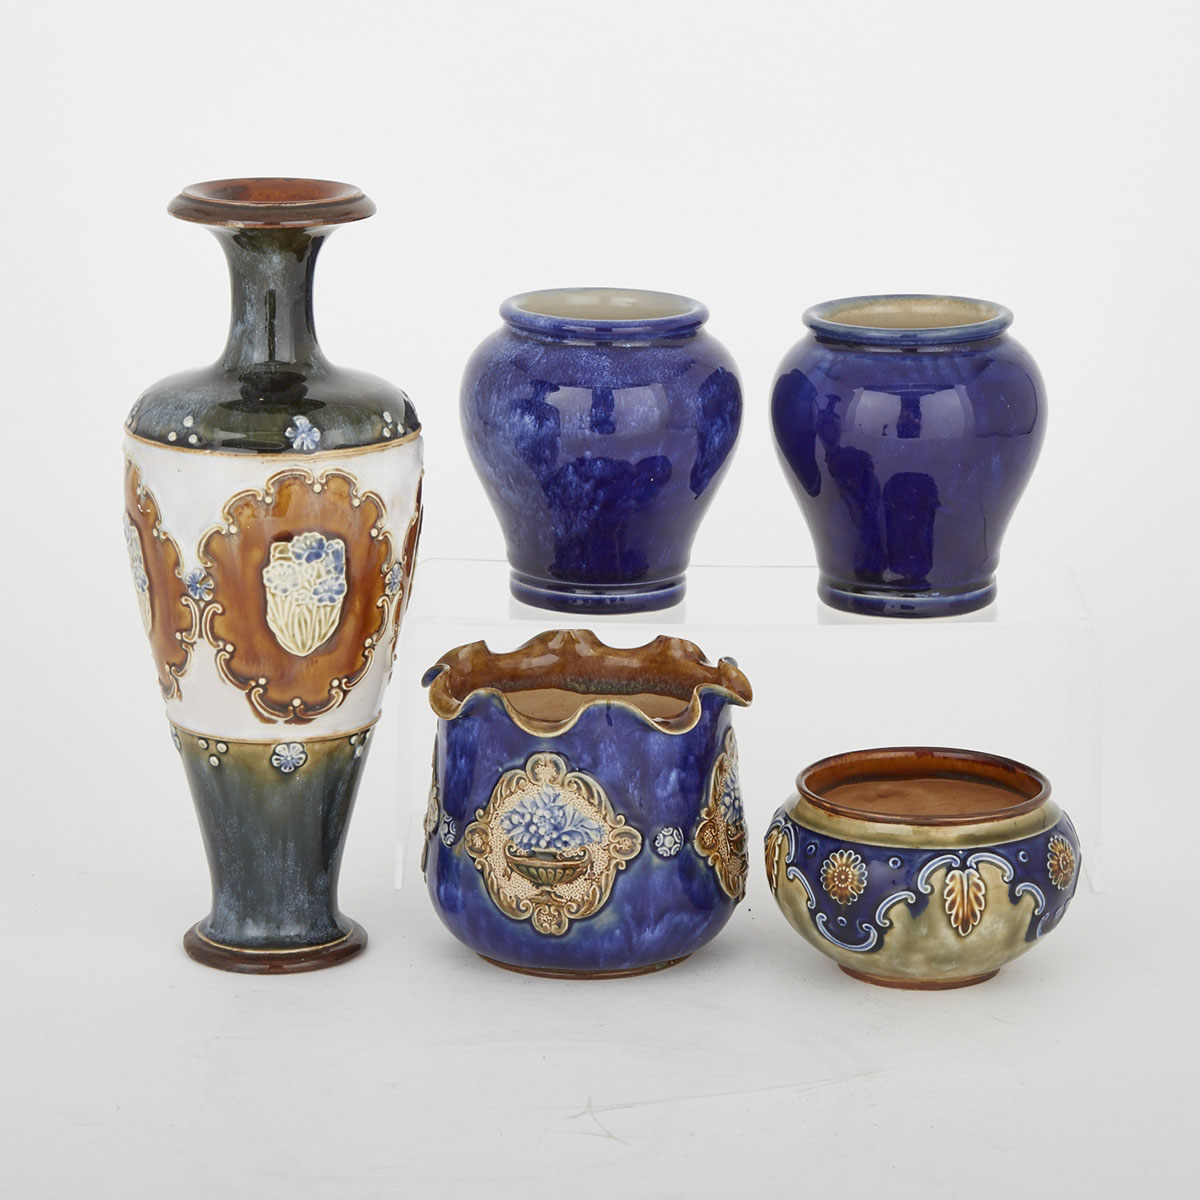 Five Royal Doulton Stoneware Vases, early 20th century